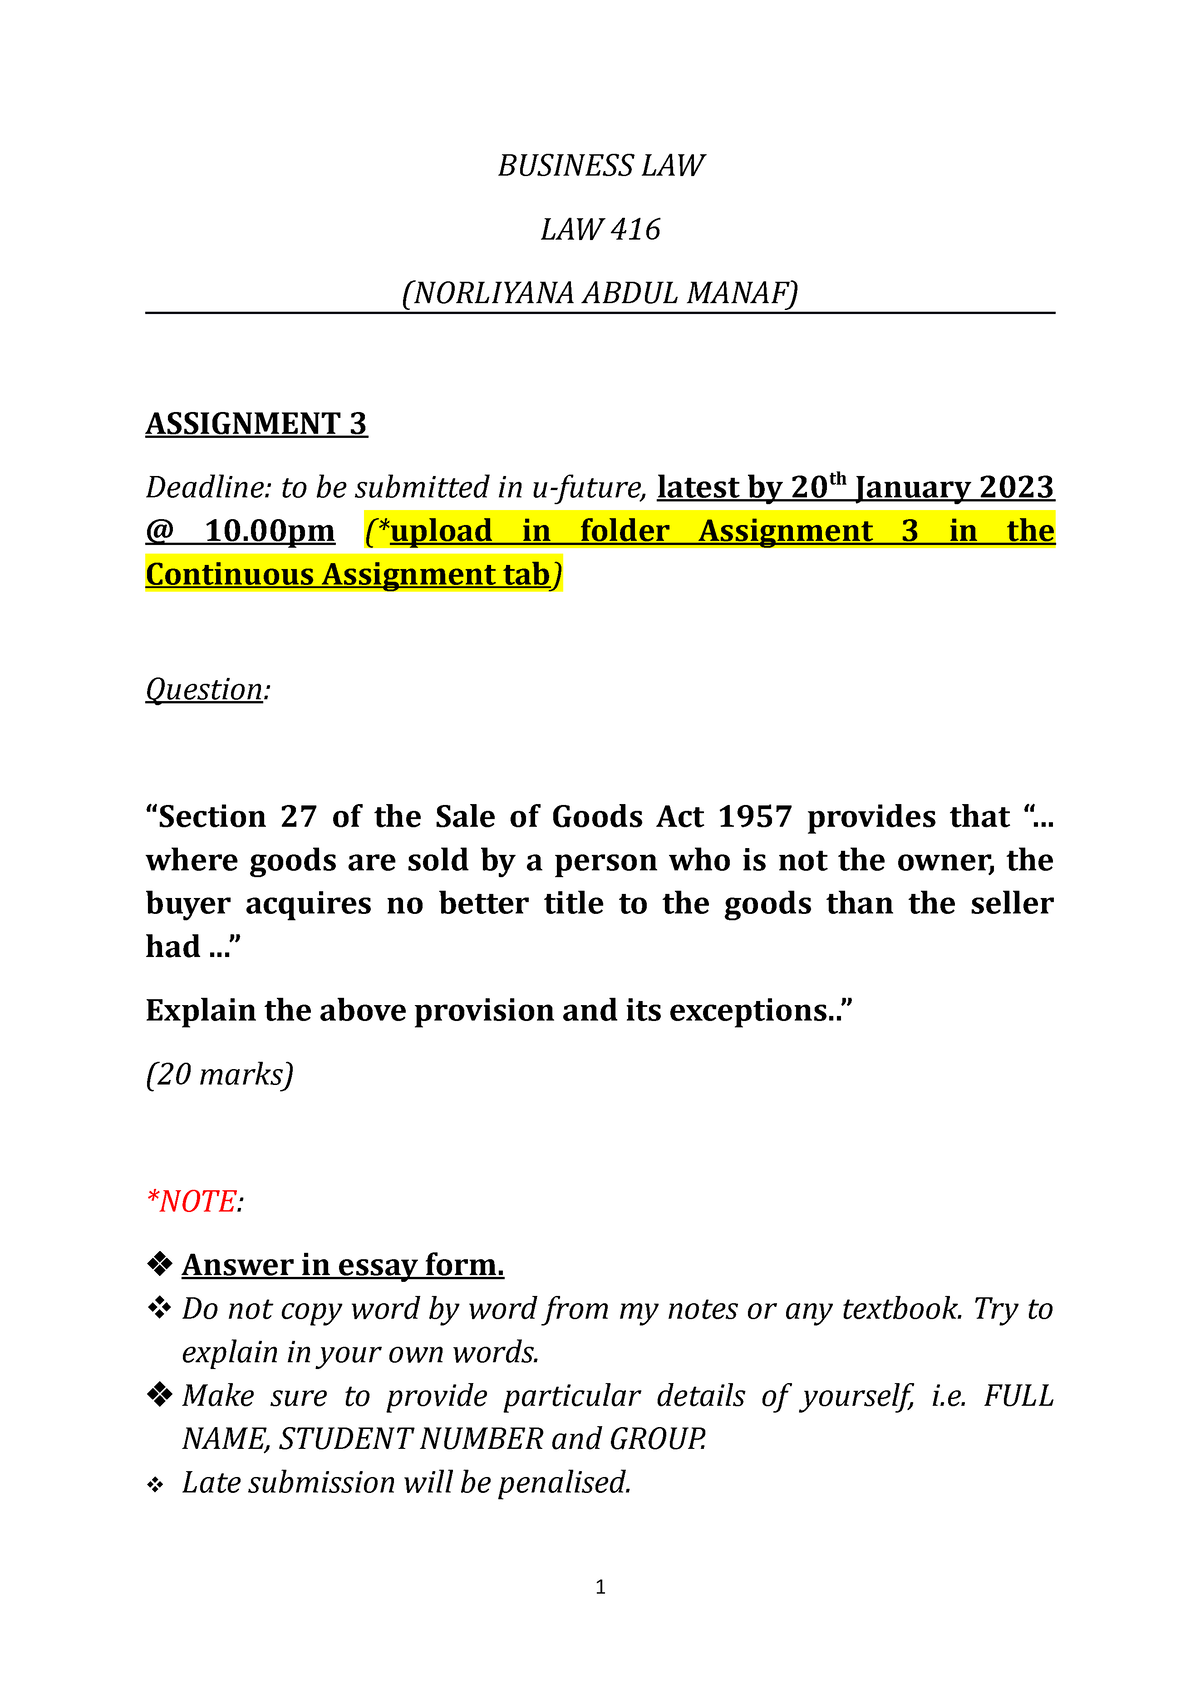 assignment law299 sale of goods